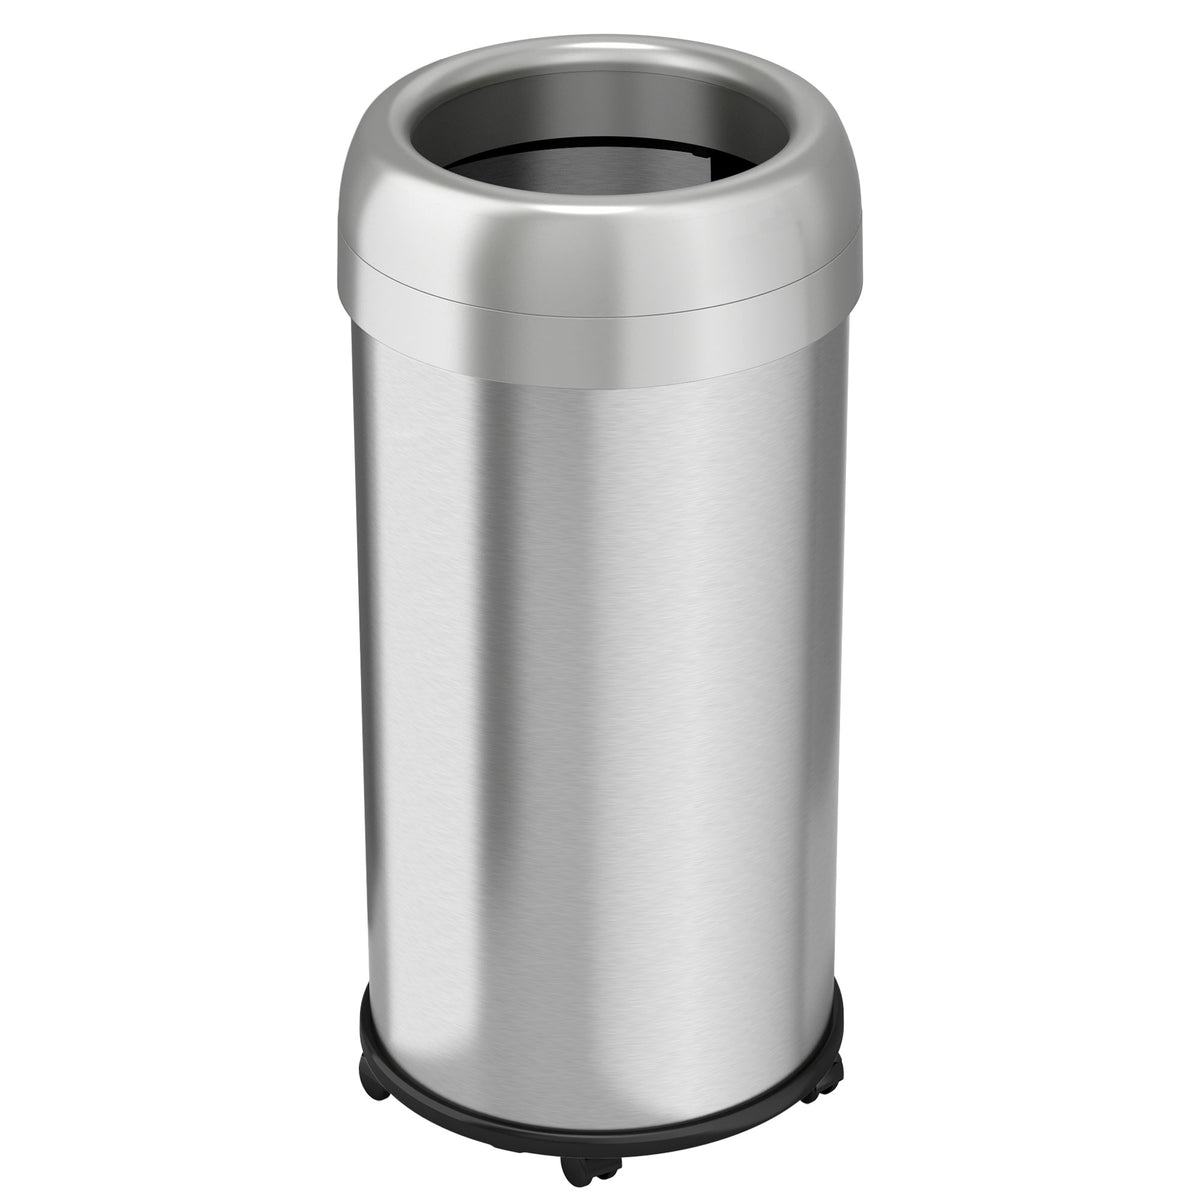 13 Gallon Round Open Top Trash Can with Wheels – iTouchless